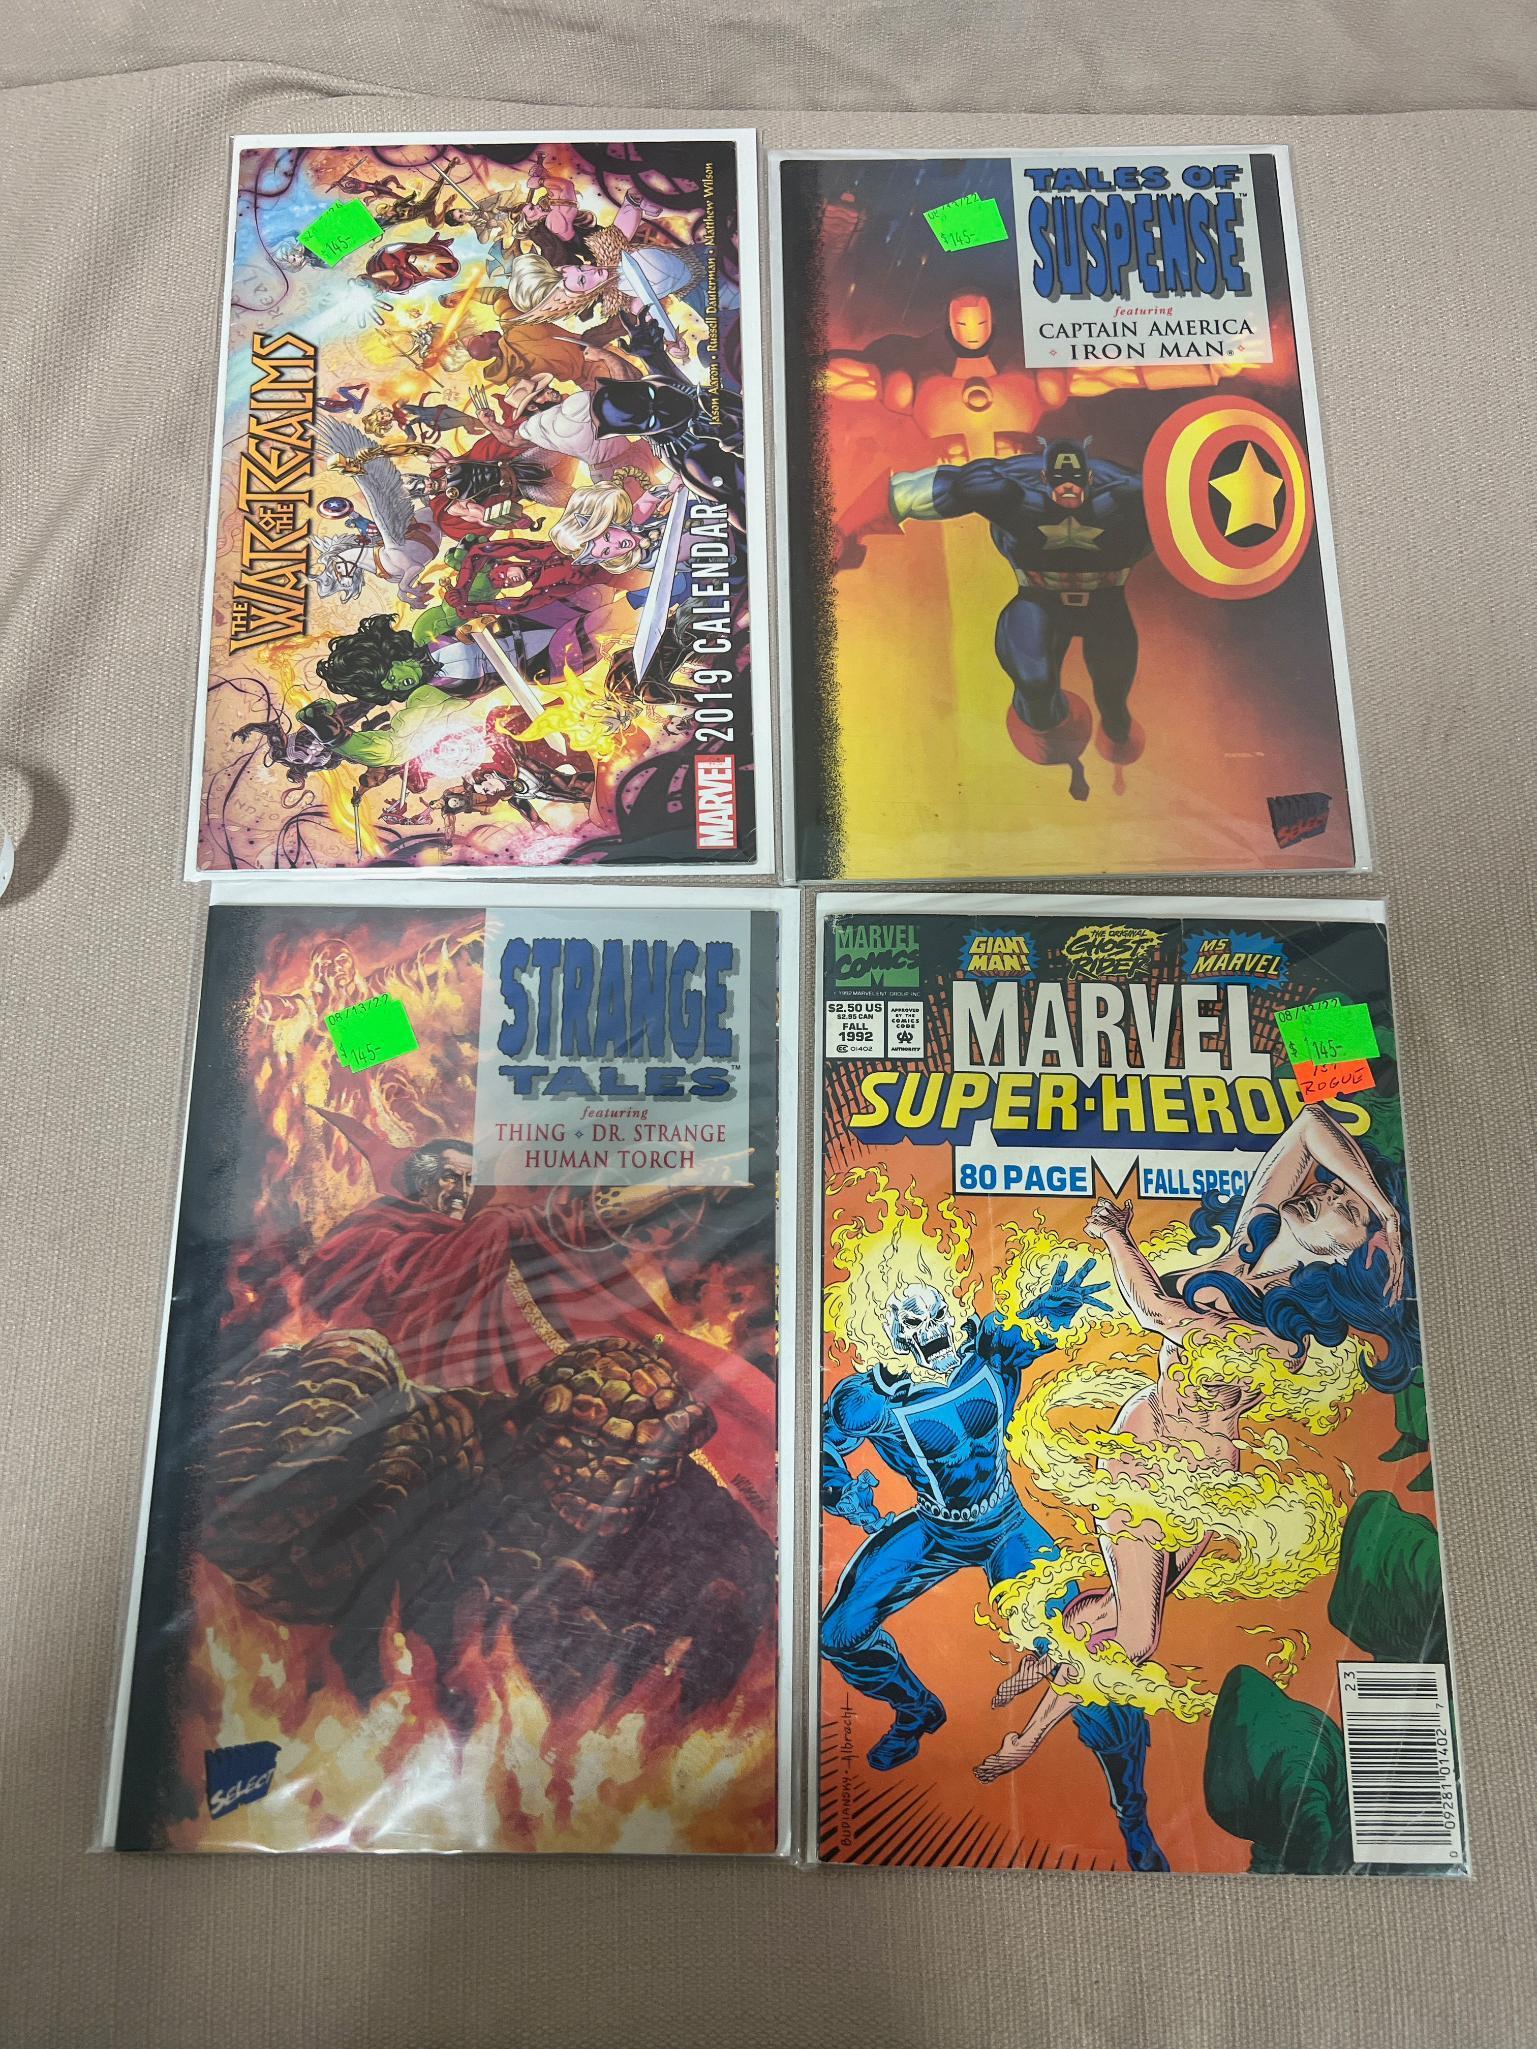 4- Better comics, Marvel, Strange Tales, The War of the Teams and Tales ofd Suspense